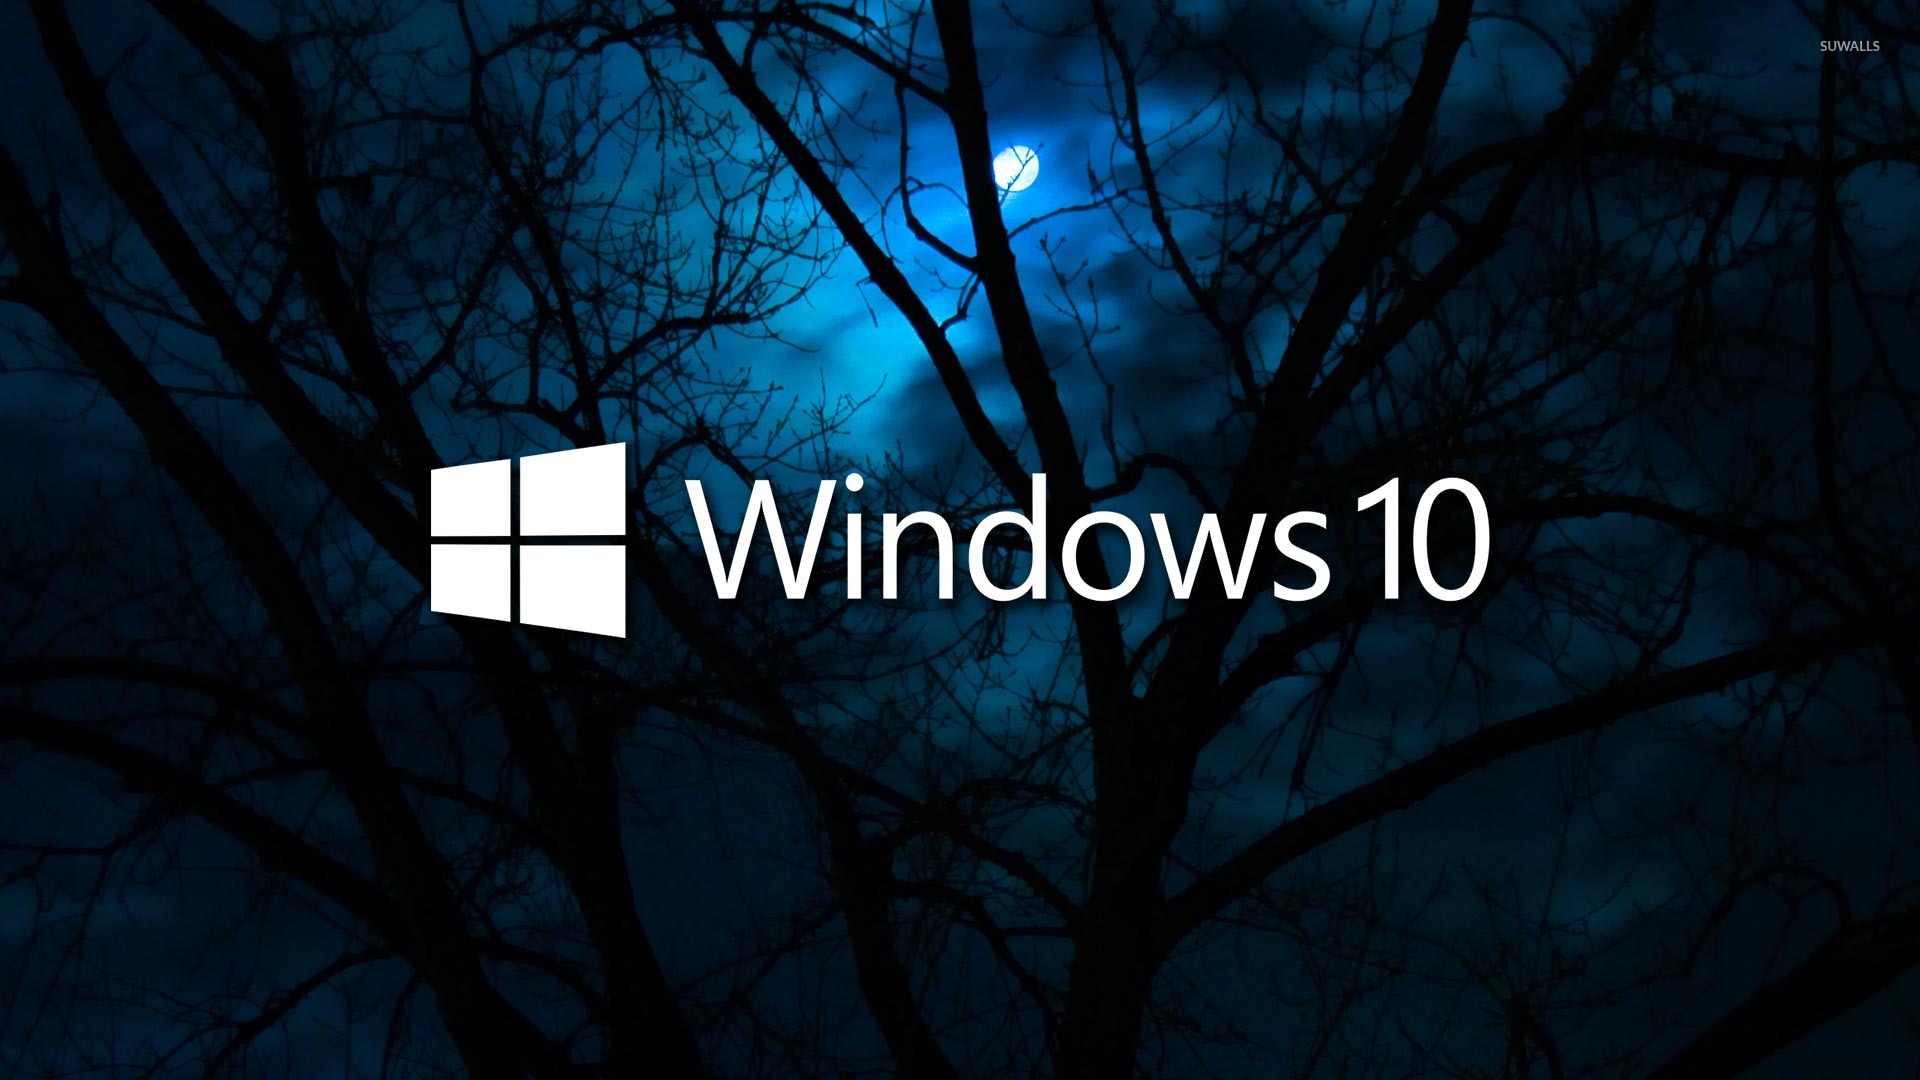 Windows 10 in the cloudy night [4] wallpaper - Computer wallpapers - #48157